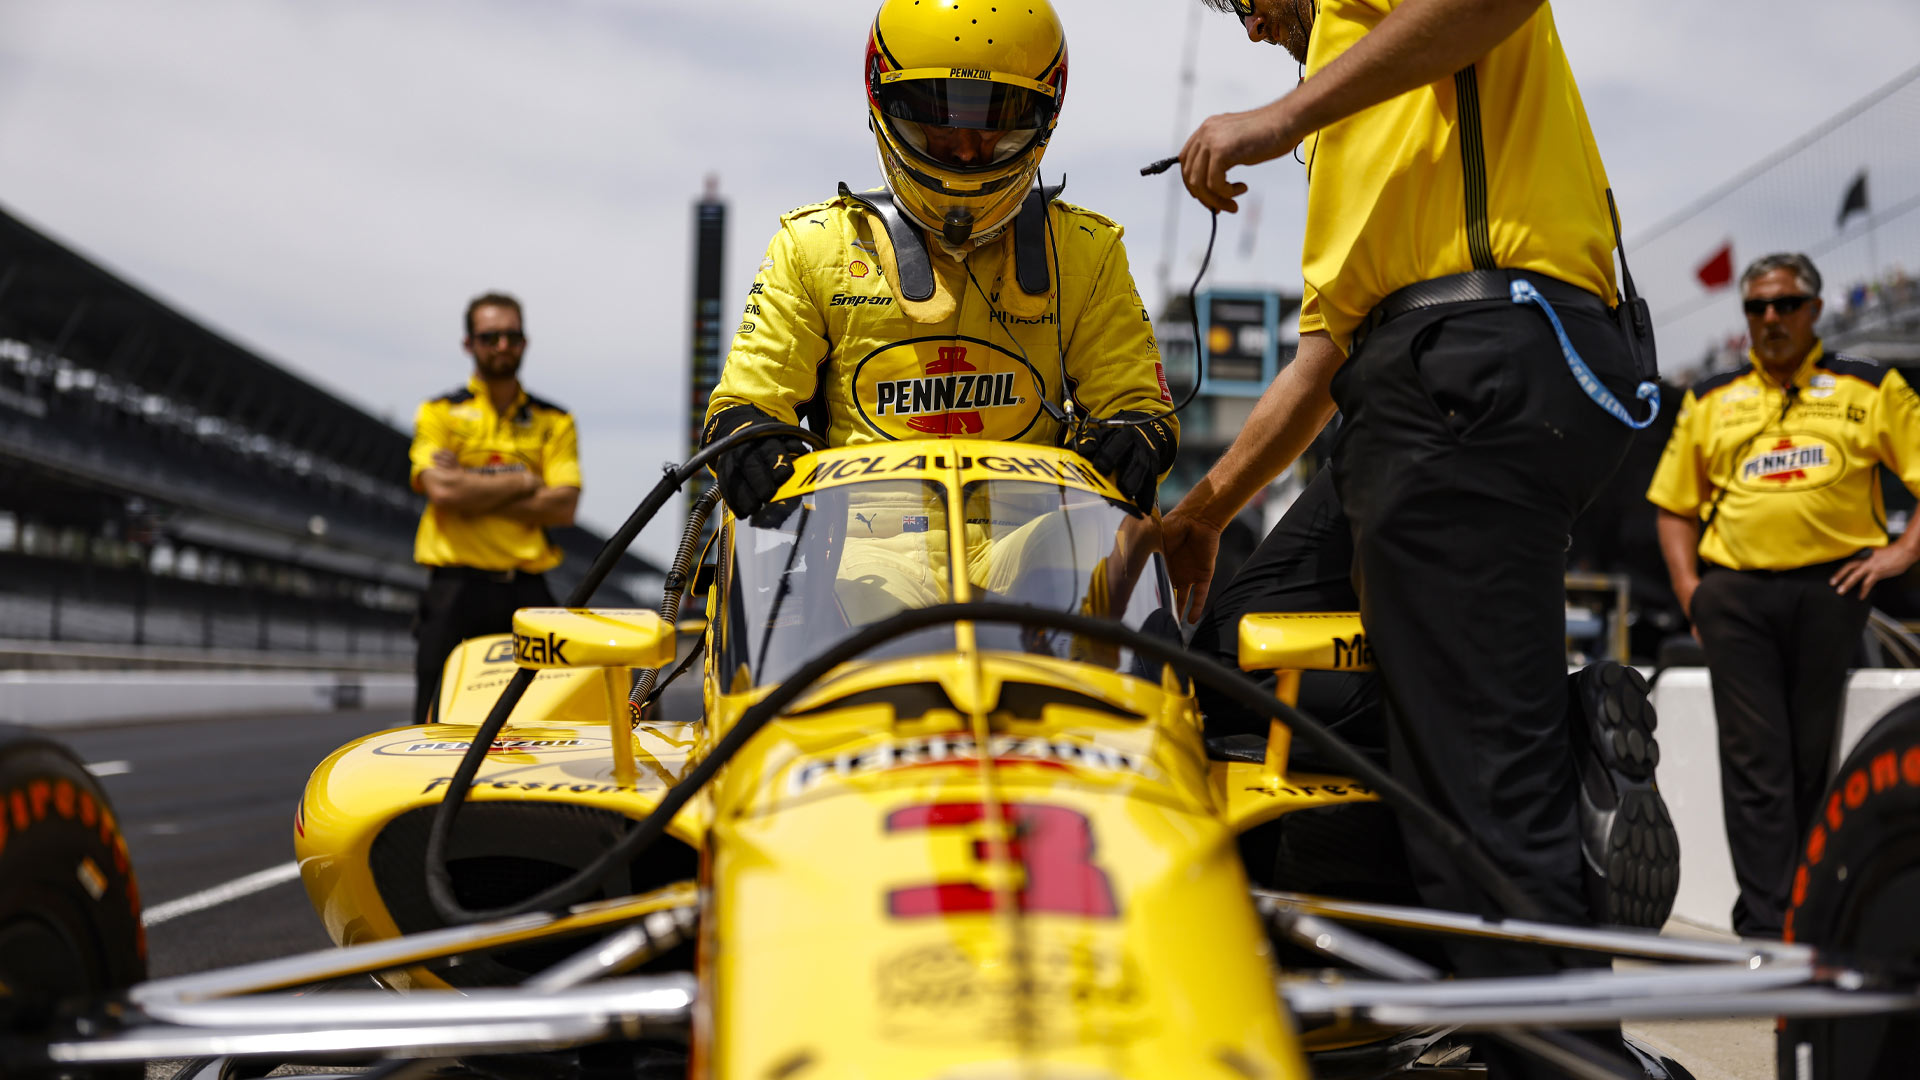 XPEL PPF Protects Team Penske Indianapolis 500 Racecars at Over 230 MPH